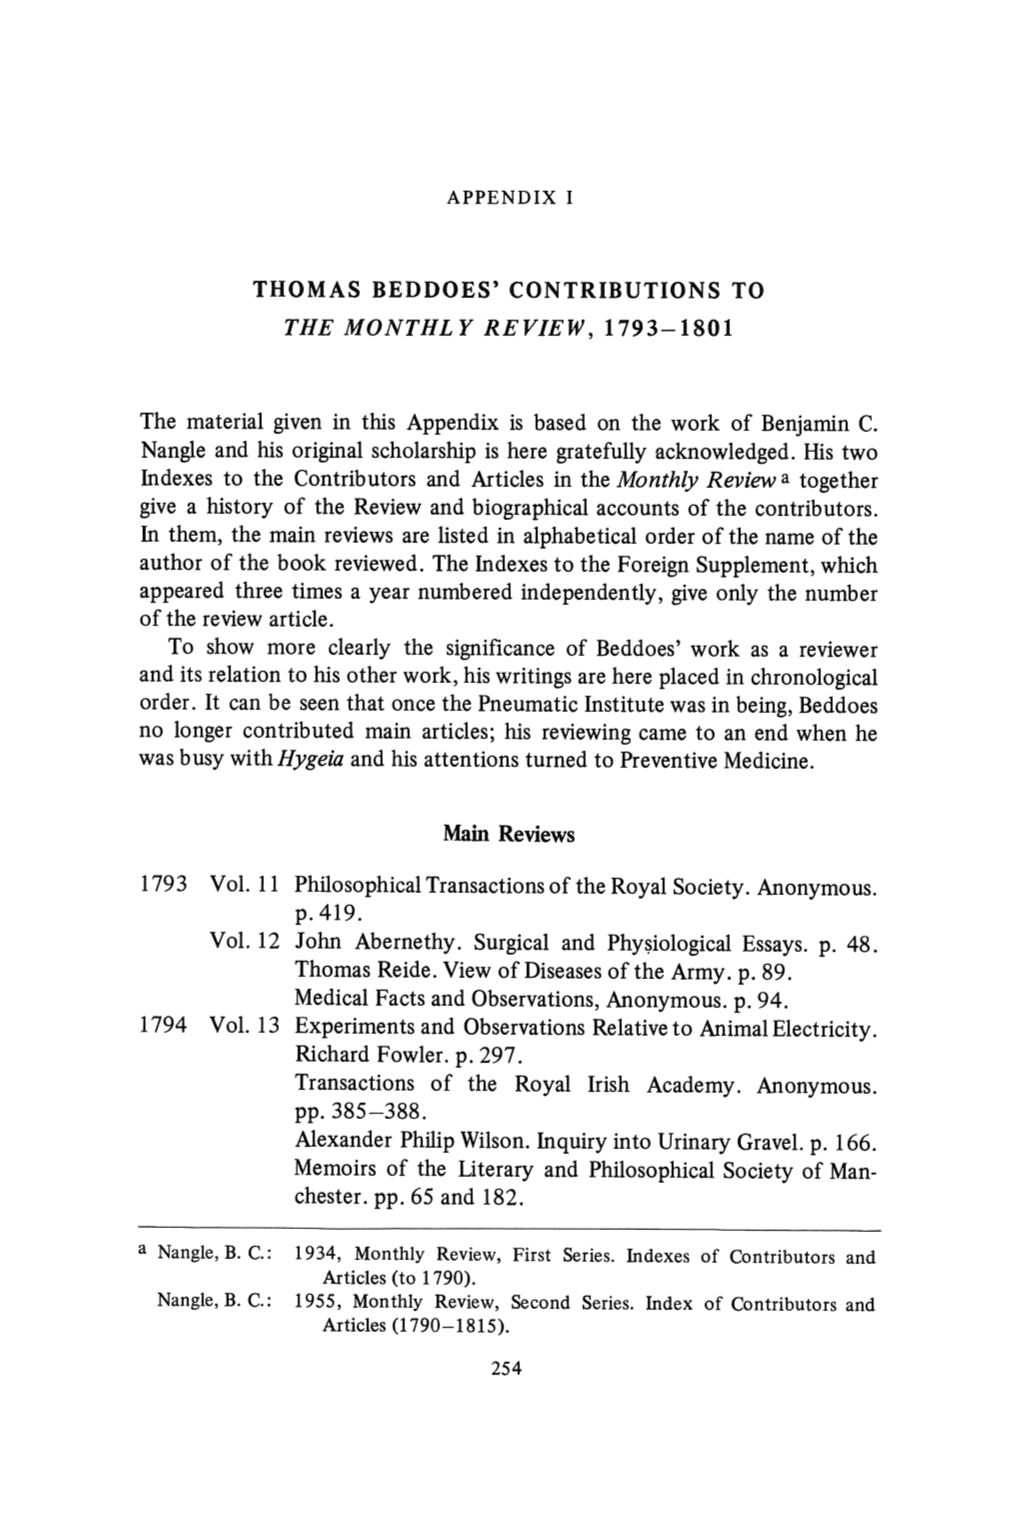 Thomas Bed Does' Contributions to the Monthly Review, 1793-1801